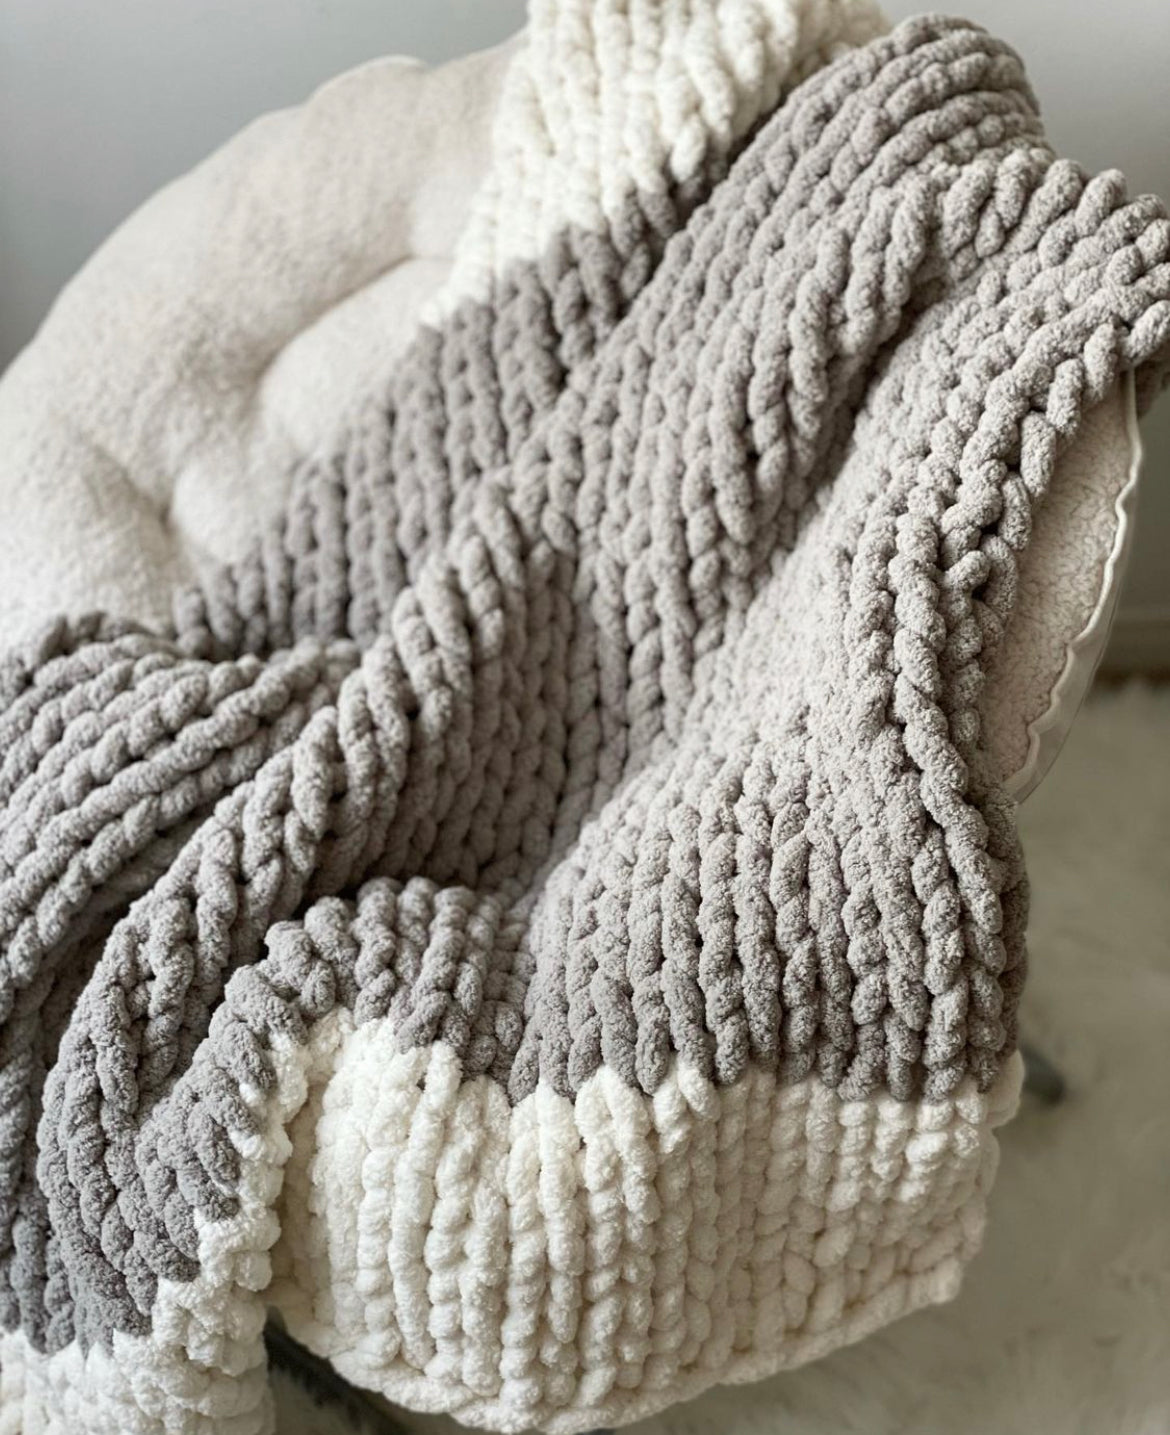 Healing Hand, Chunky Knit Blankets Light Grey with White Ends